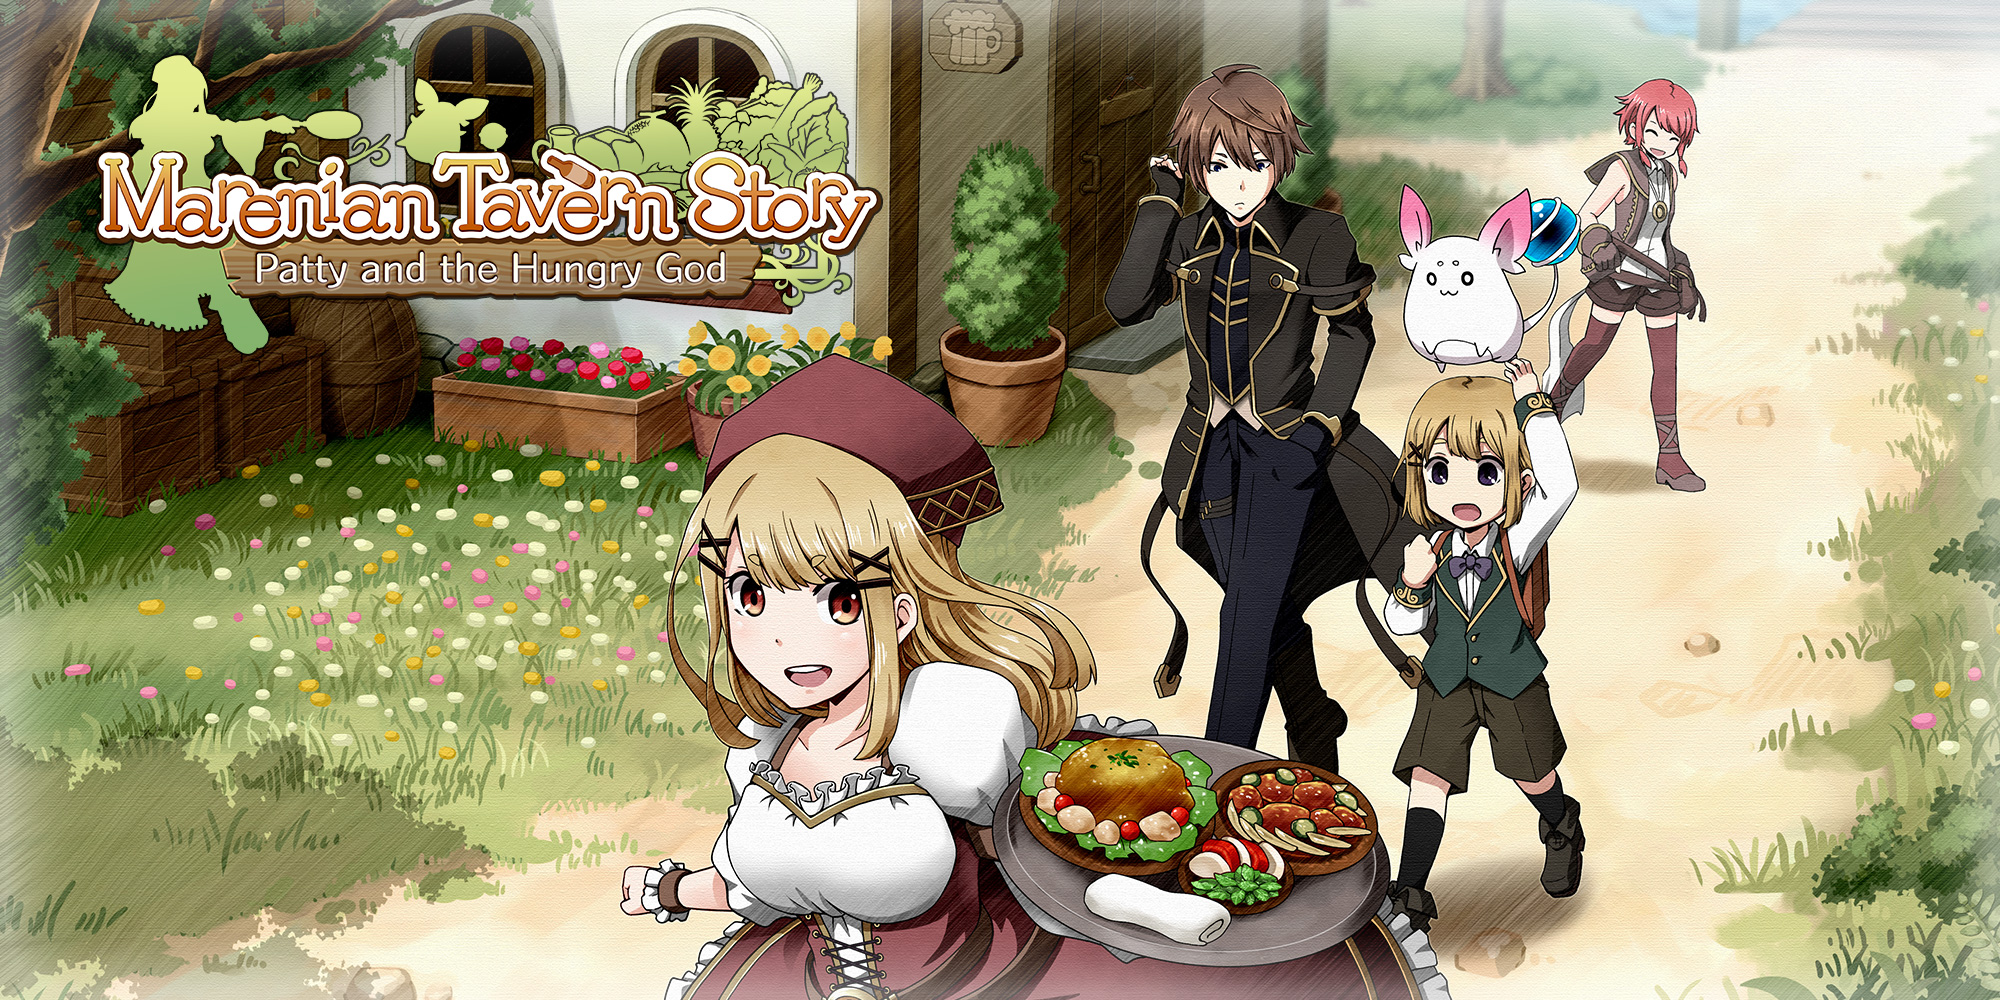 Marenian Tavern Story: Patty and the Hungry God | Nintendo Switch download  software | Games | Nintendo